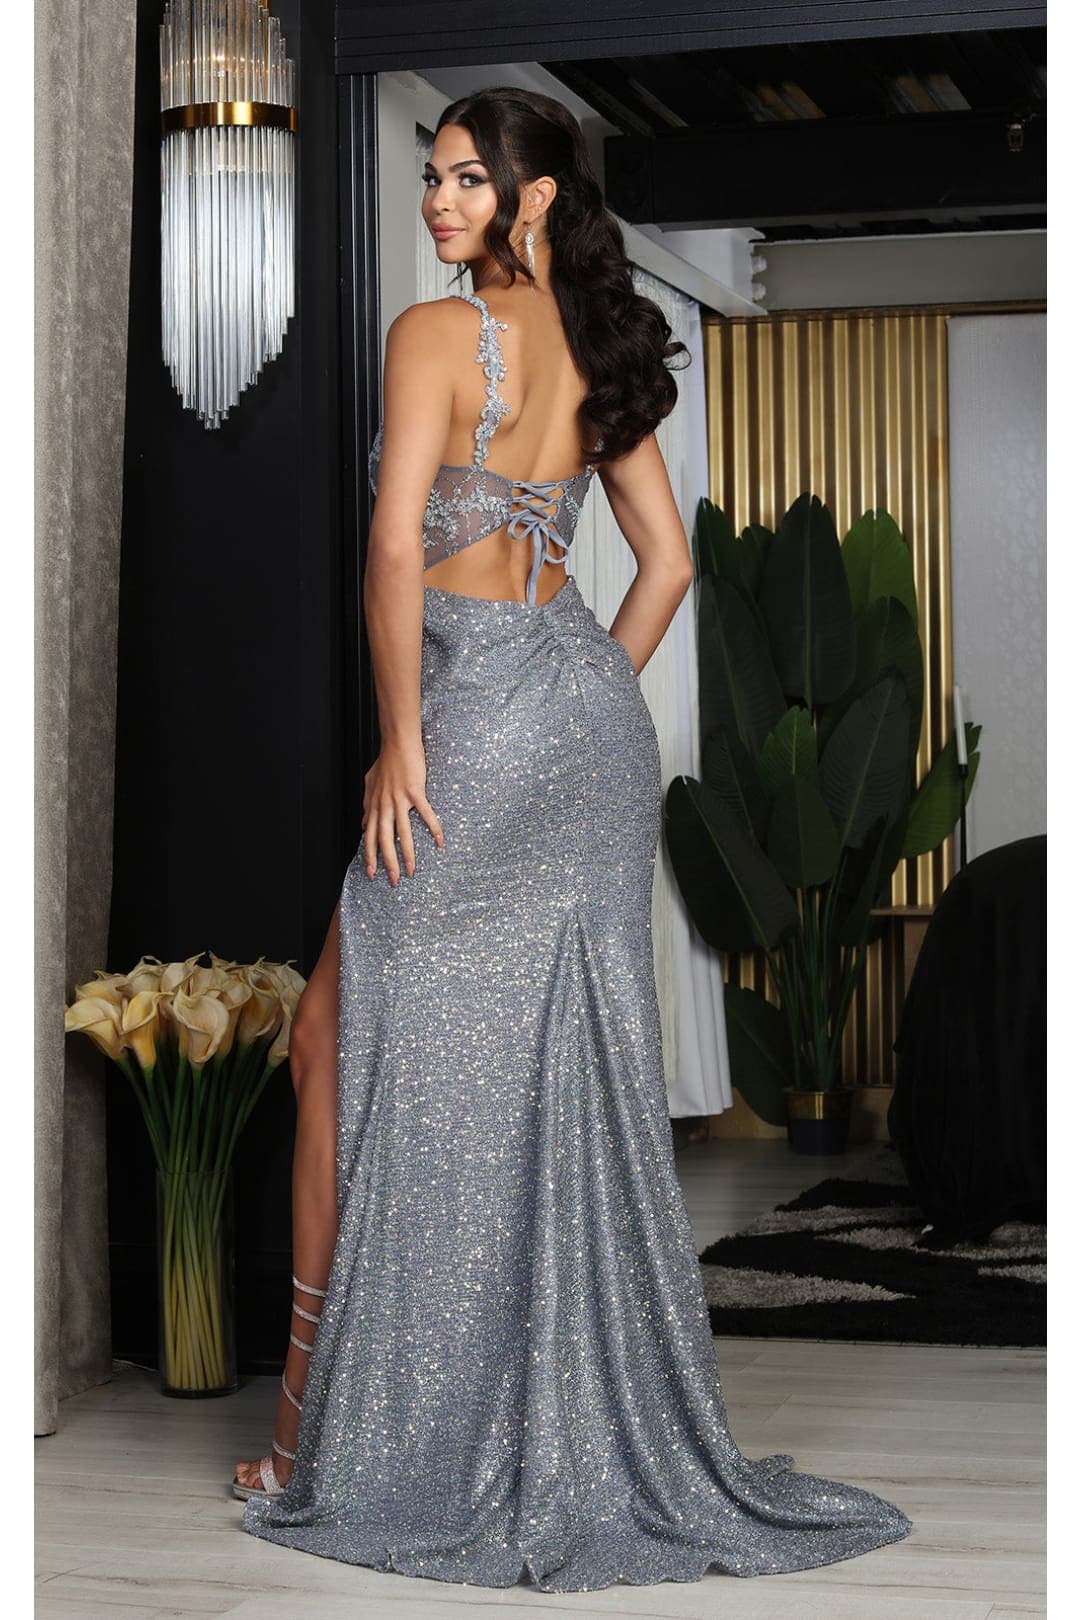 Royal Queen RQ8067 Cut Out Back Slit Sheer Bodice Formal Prom Dress - Dress